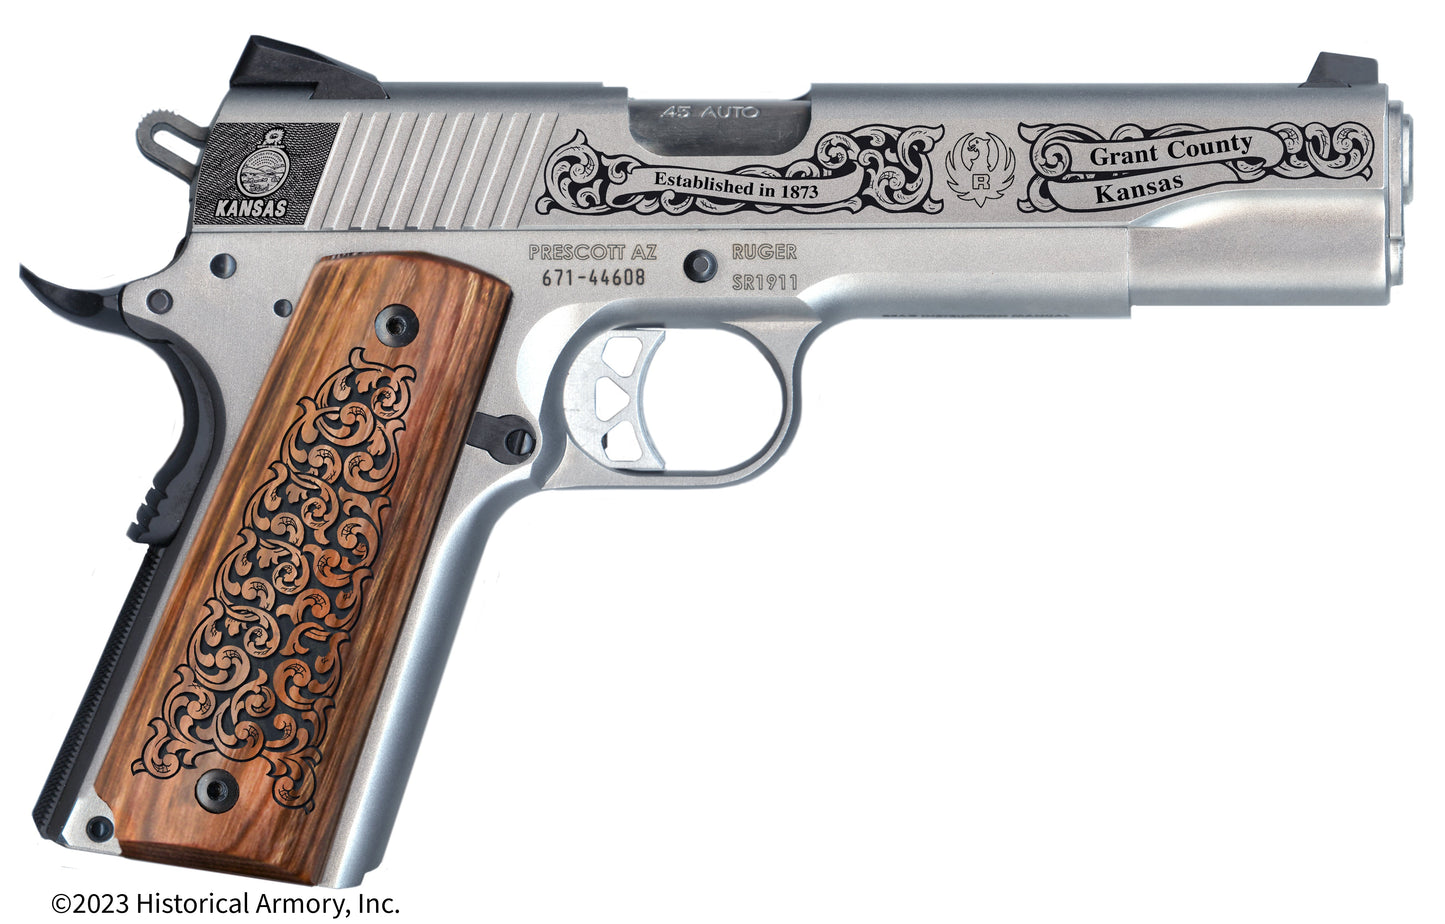 Grant County Kansas Engraved .45 Auto Ruger 1911